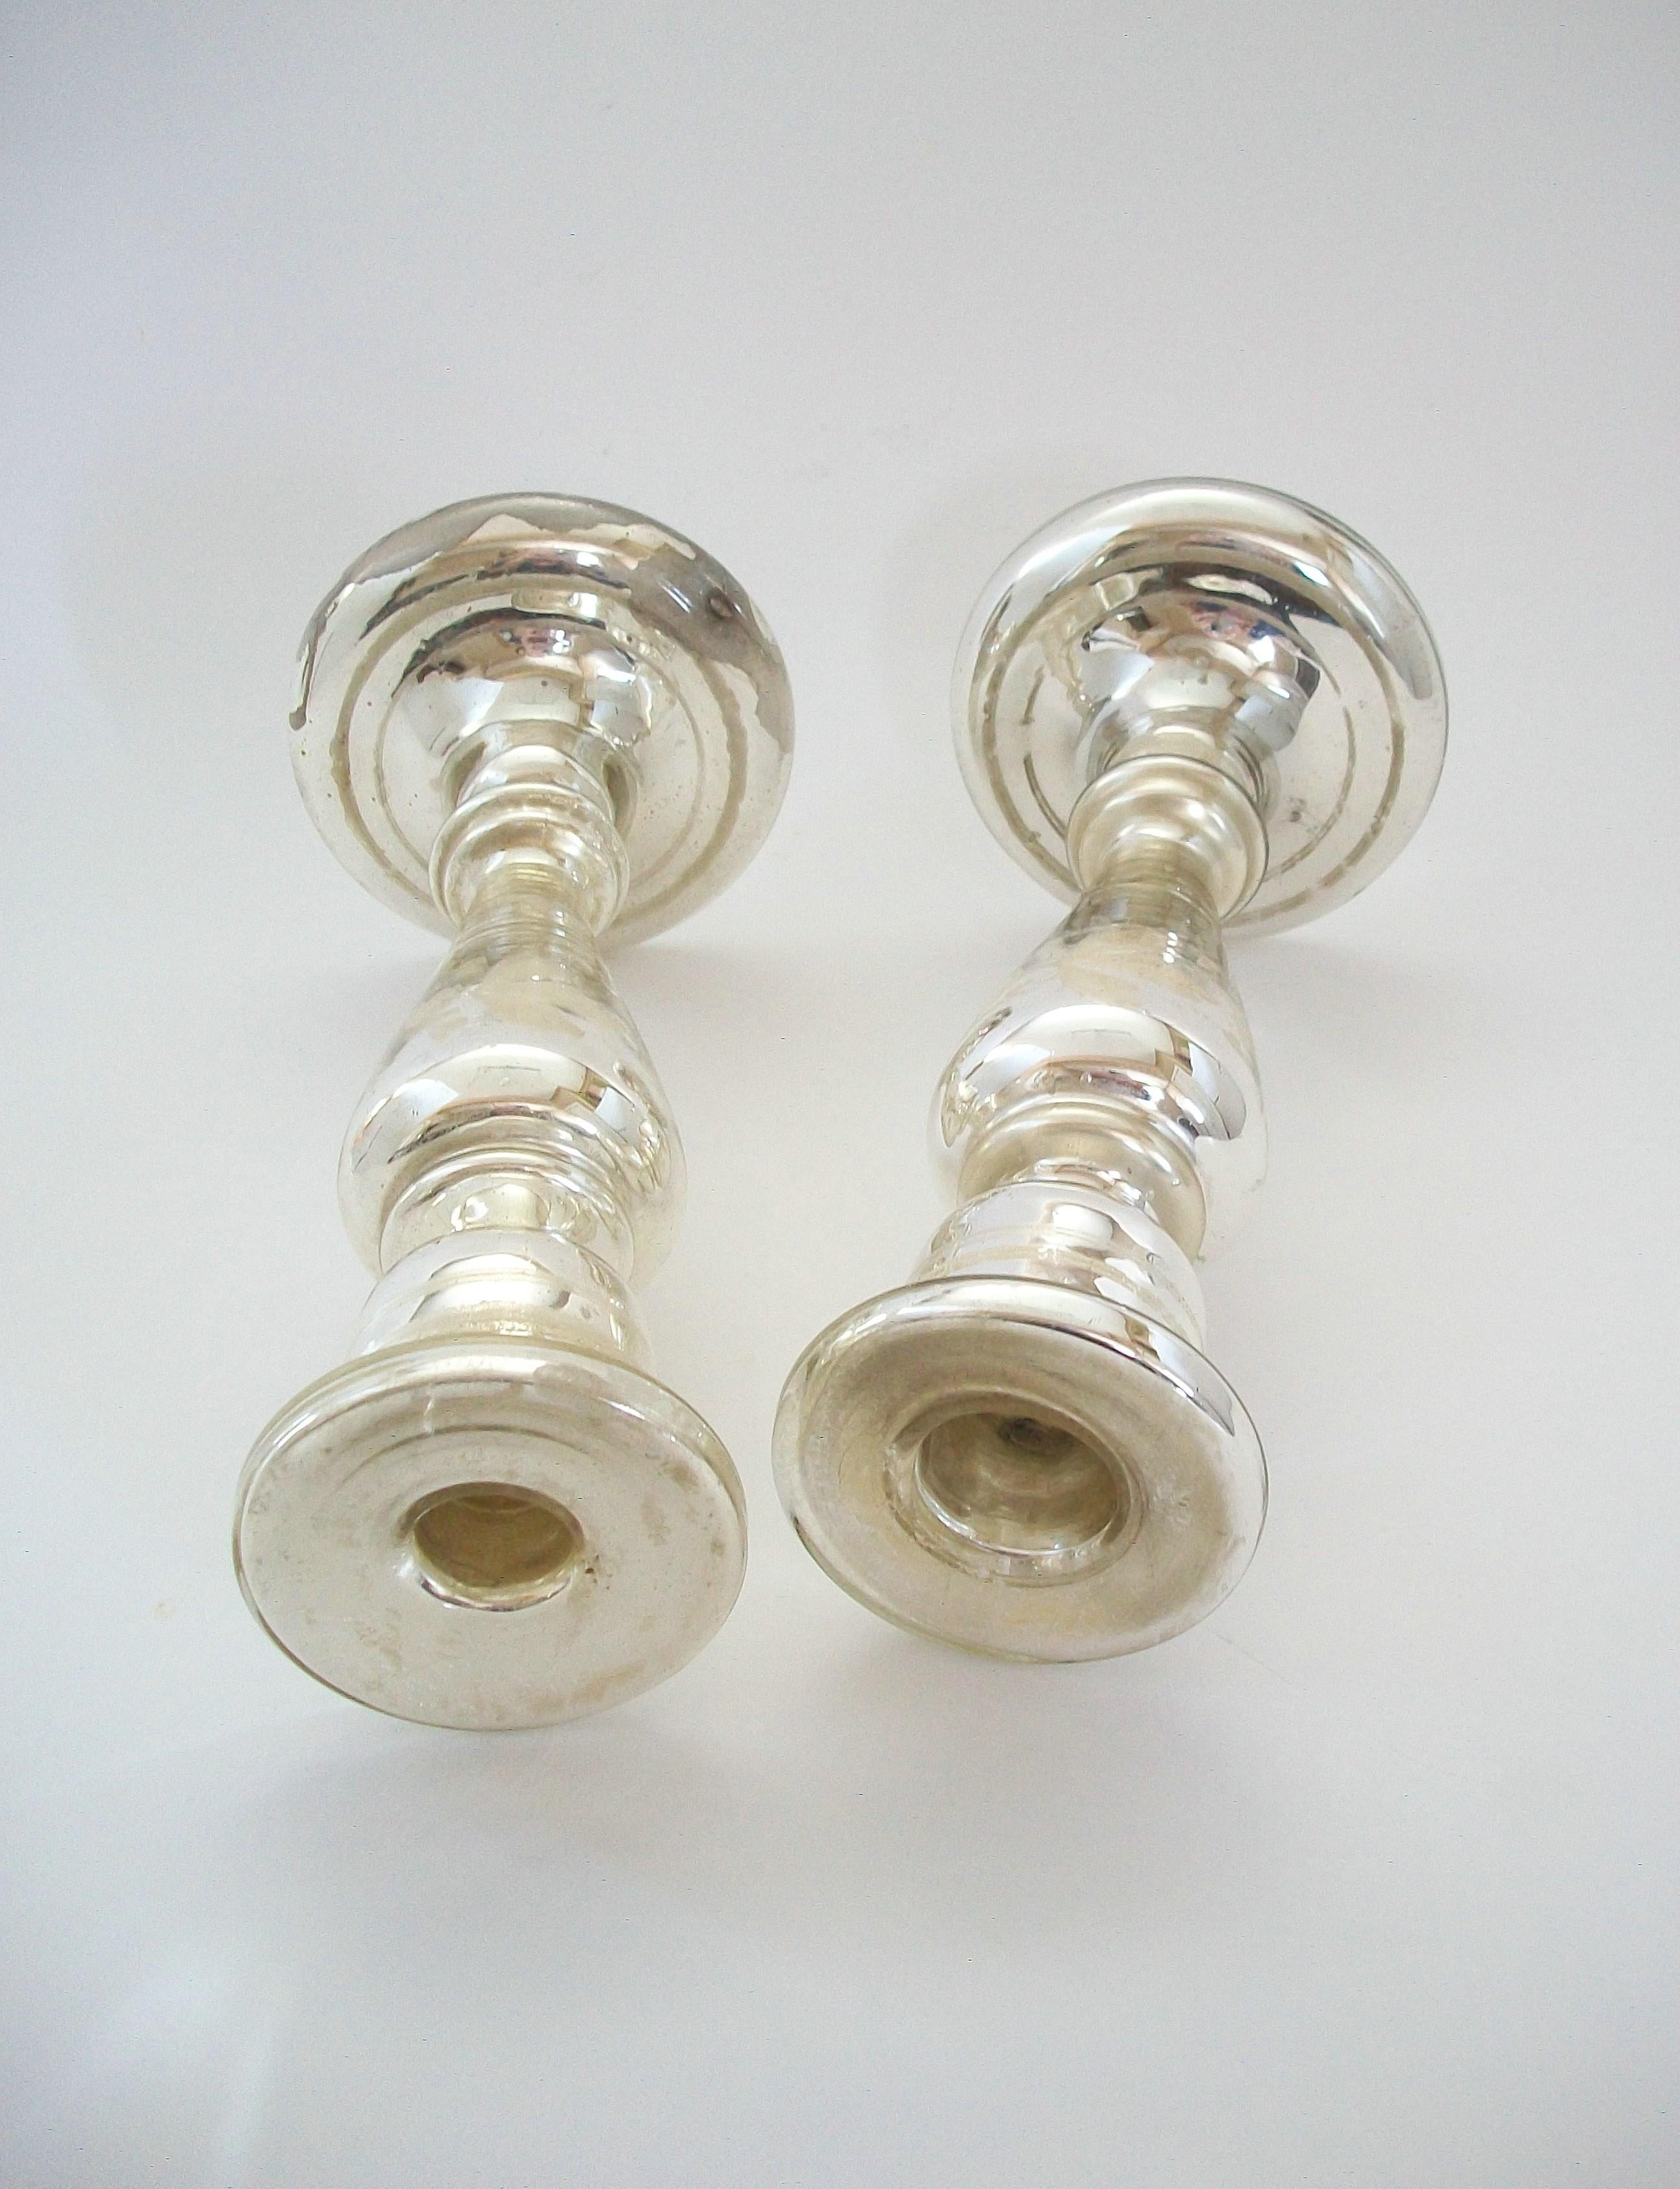 19th Century Antique Pair of White Painted Mercury Glass Candlesticks - France - Circa 1880 For Sale